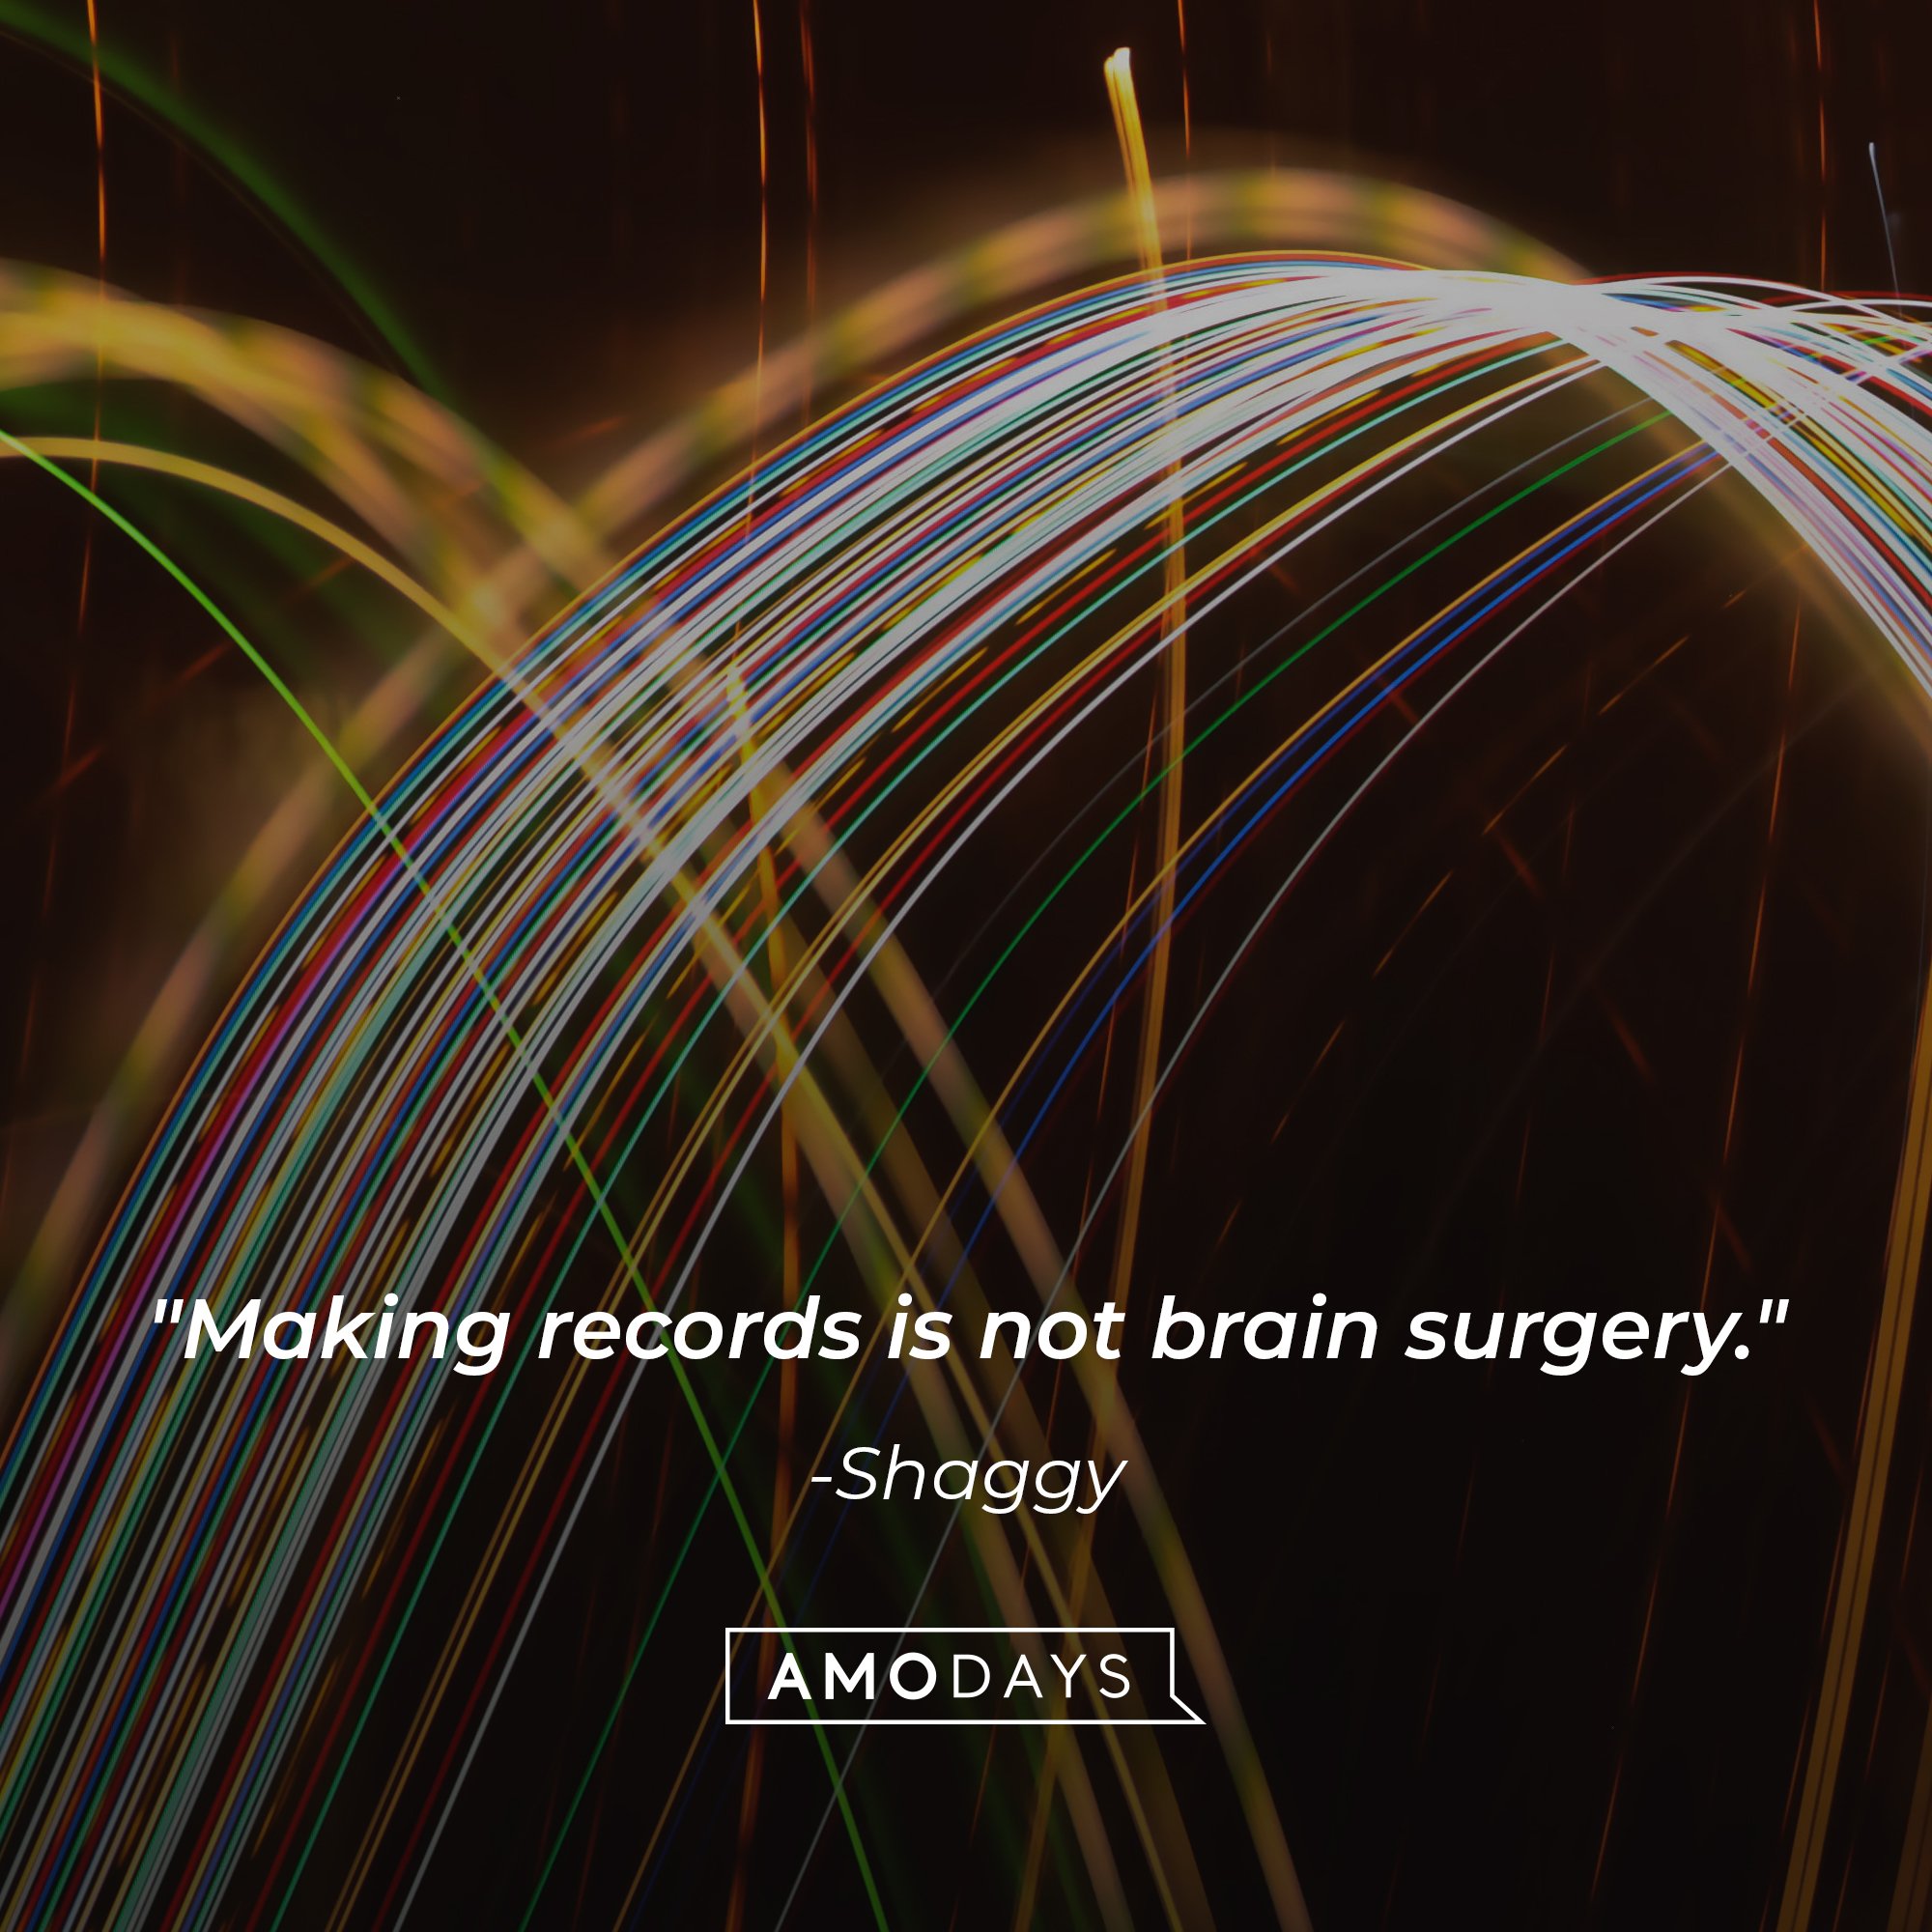 Shaggy's quote: "Making records is not brain surgery." | Image: AmoDays